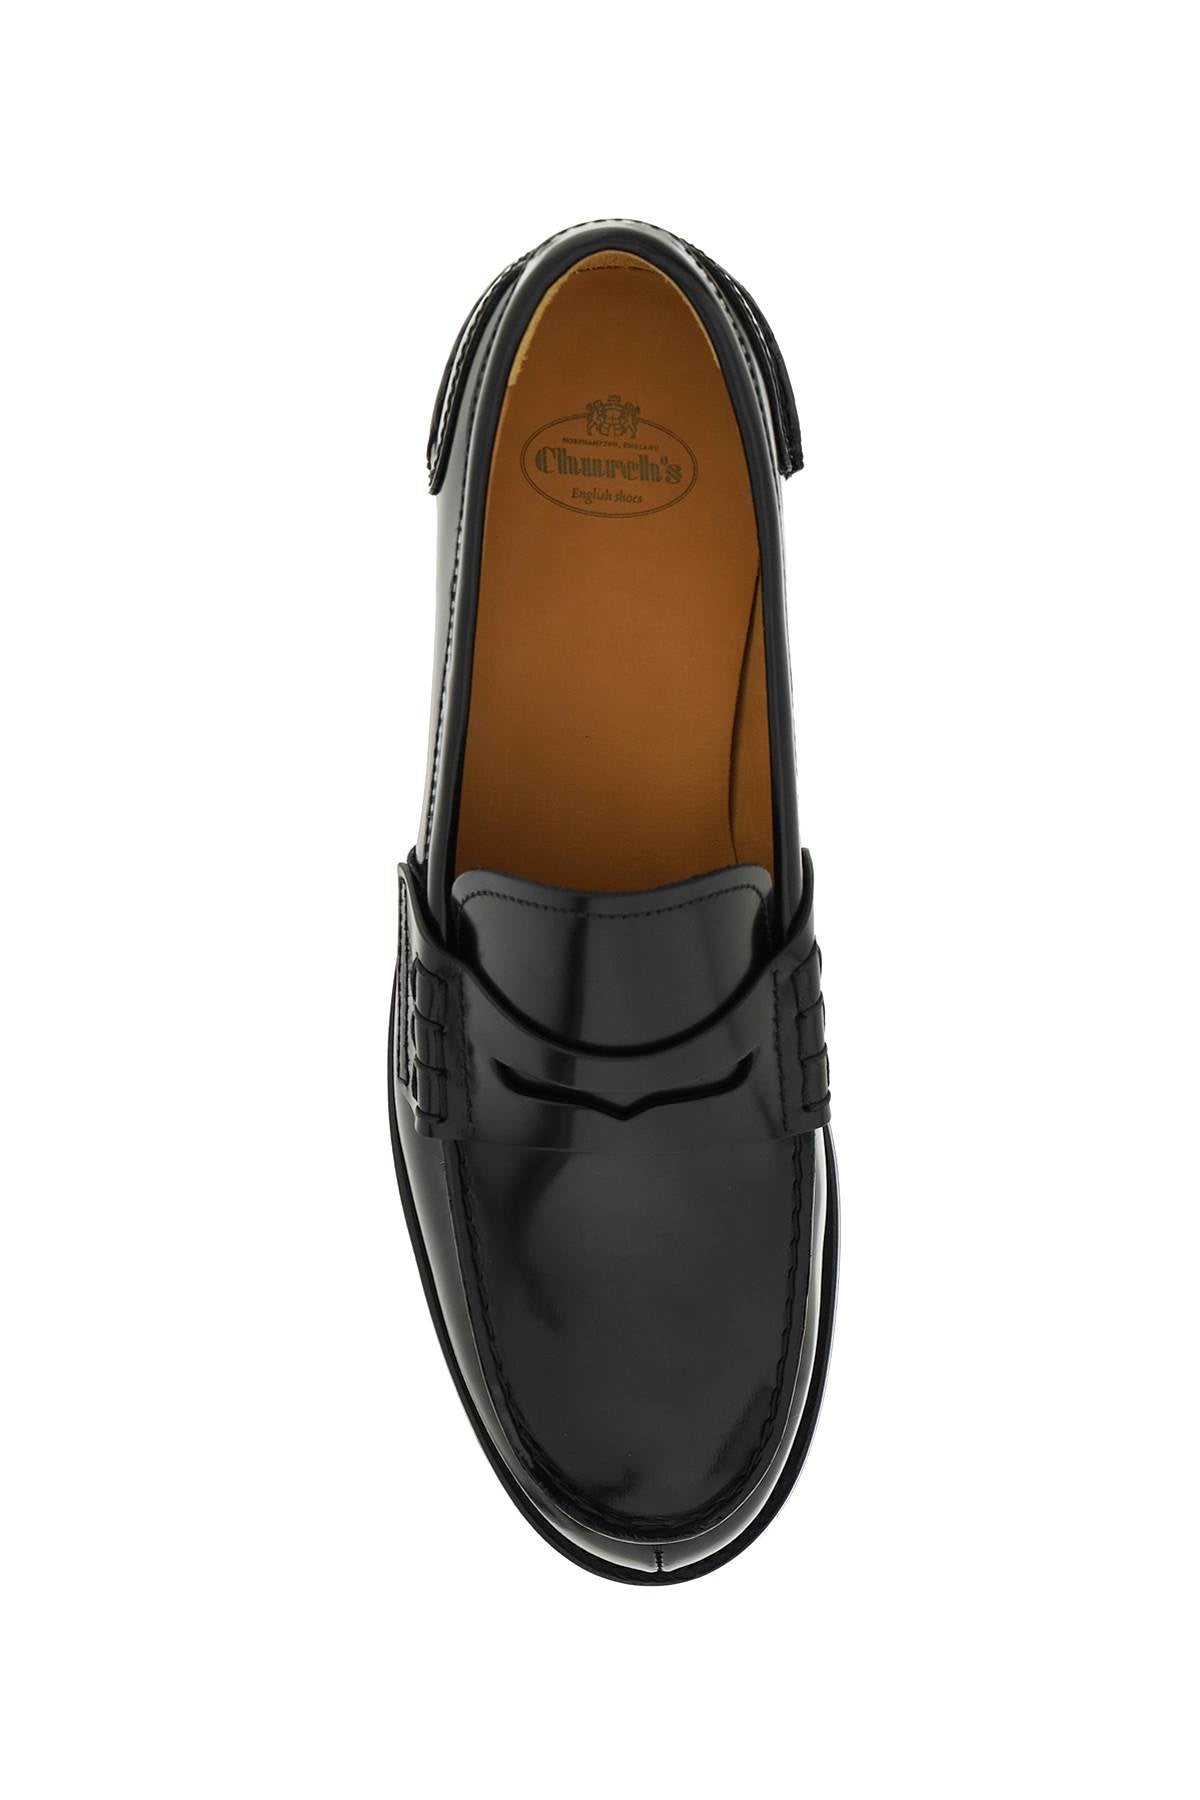 CHURCH'S Stylish Black Loafers for Women - SS23 Collection